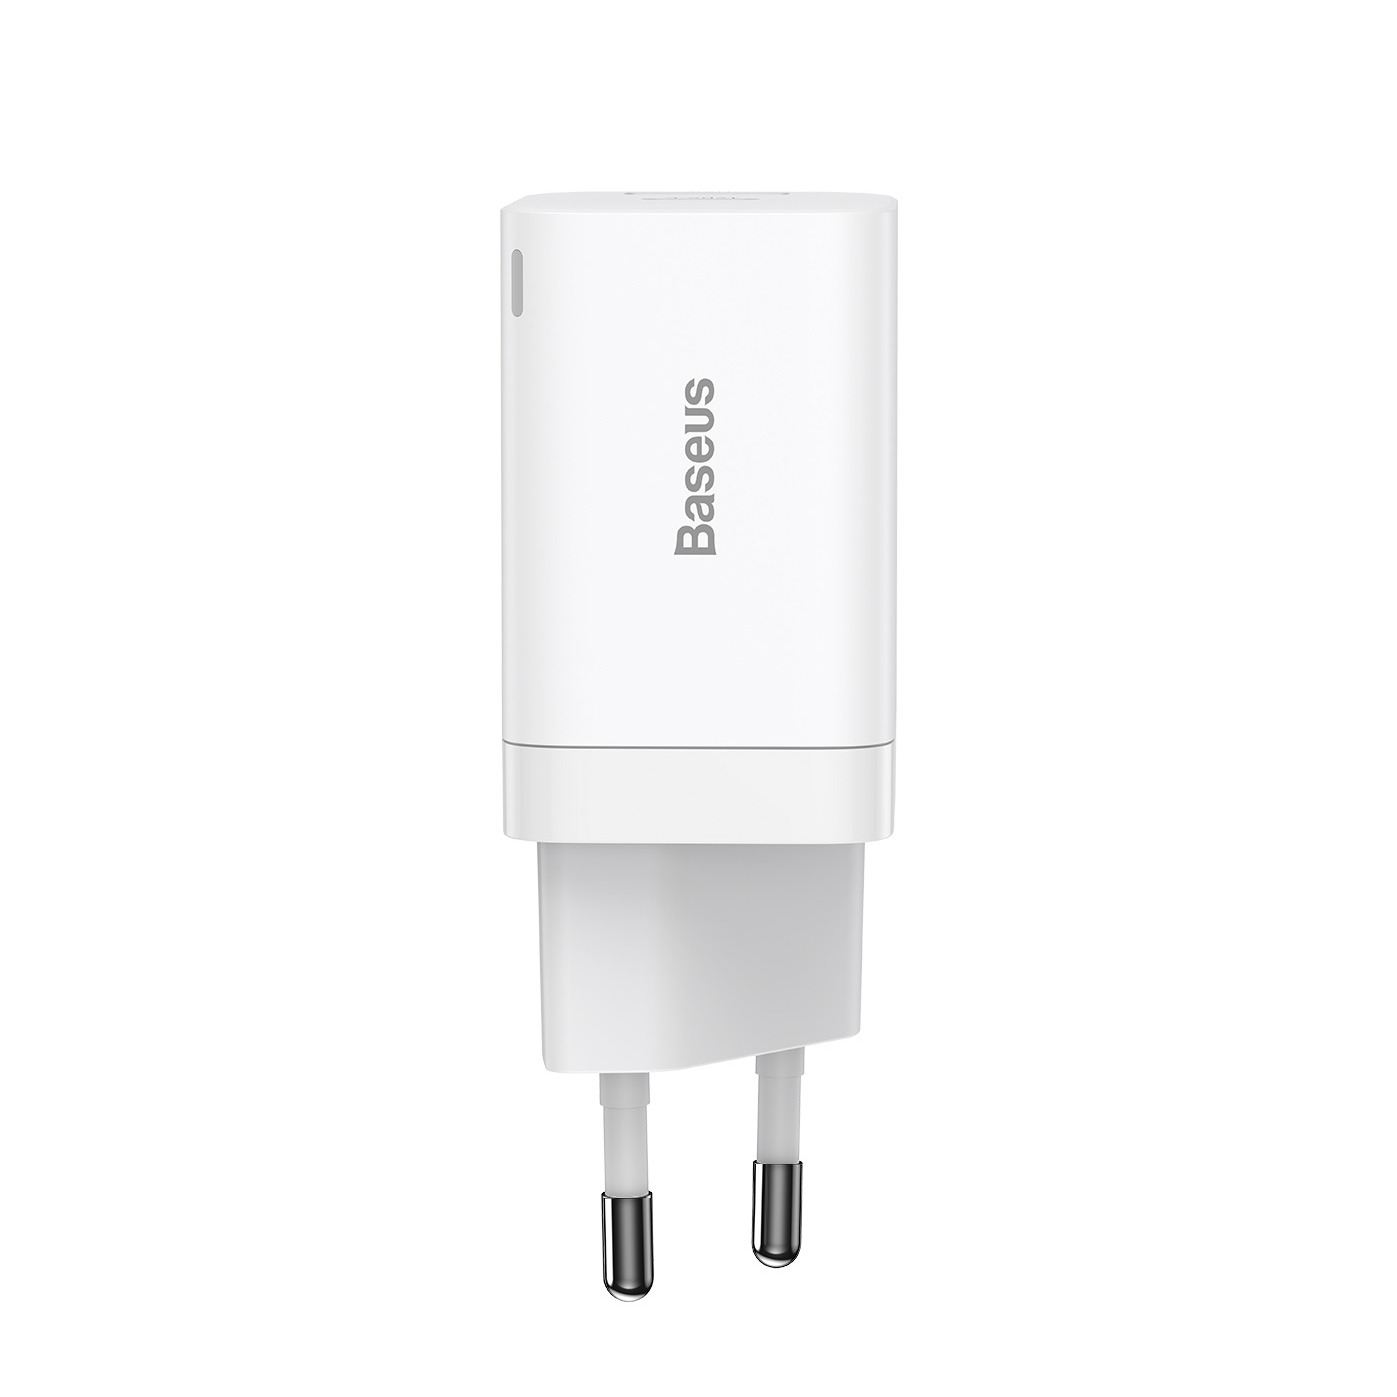 Image of Baseus - (30W) USB / USB C Quick Charge QC 3.0 Ladegerät mit Power Delivery 3.0 - Weiss bei Apfelkiste.ch